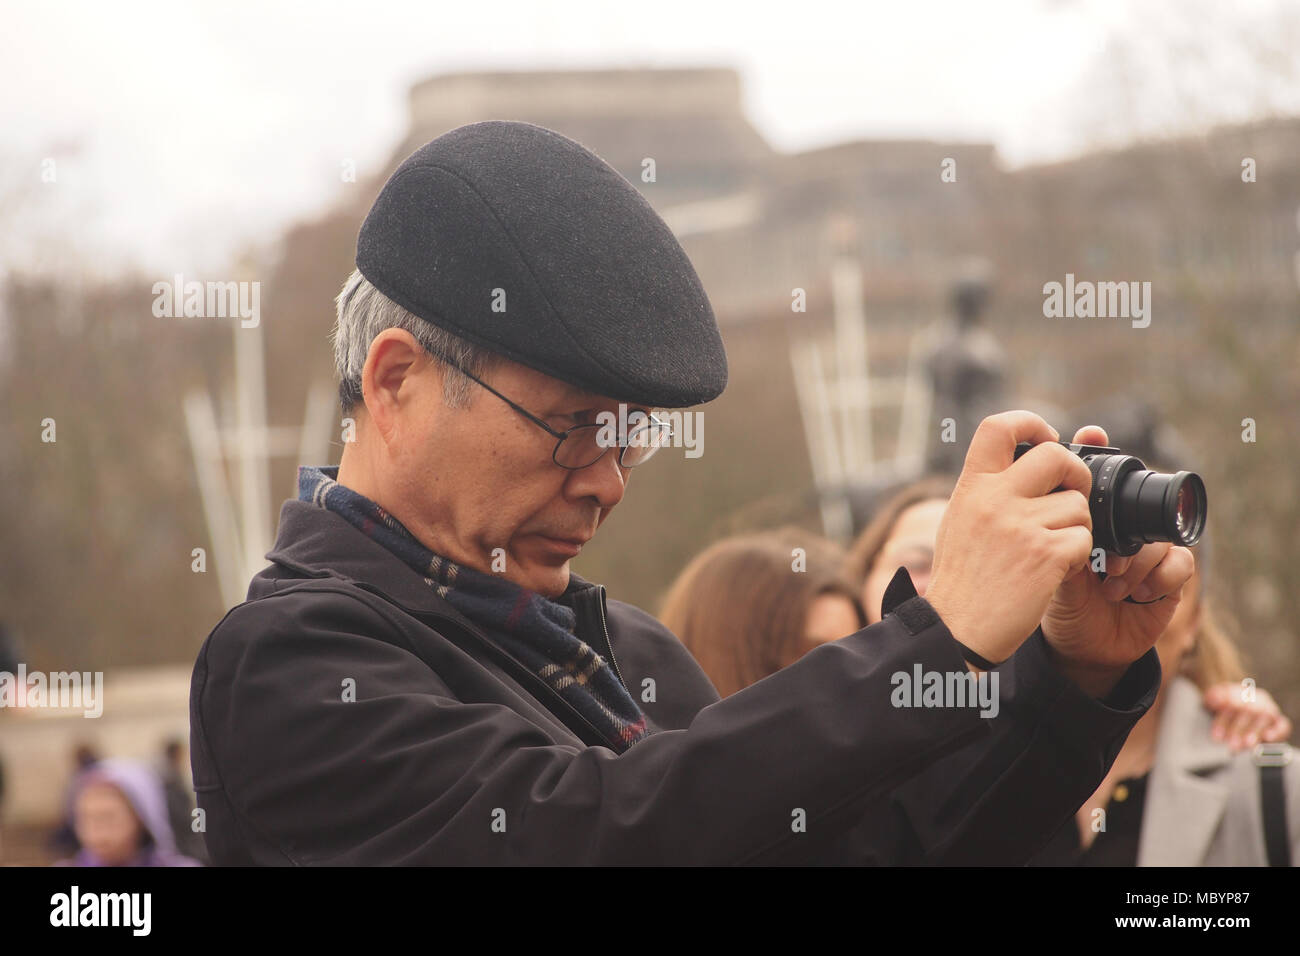 An older man taking a photograph with a camera in the area in front of Buckingham Palace, London, wearing a flat cap Stock Photo